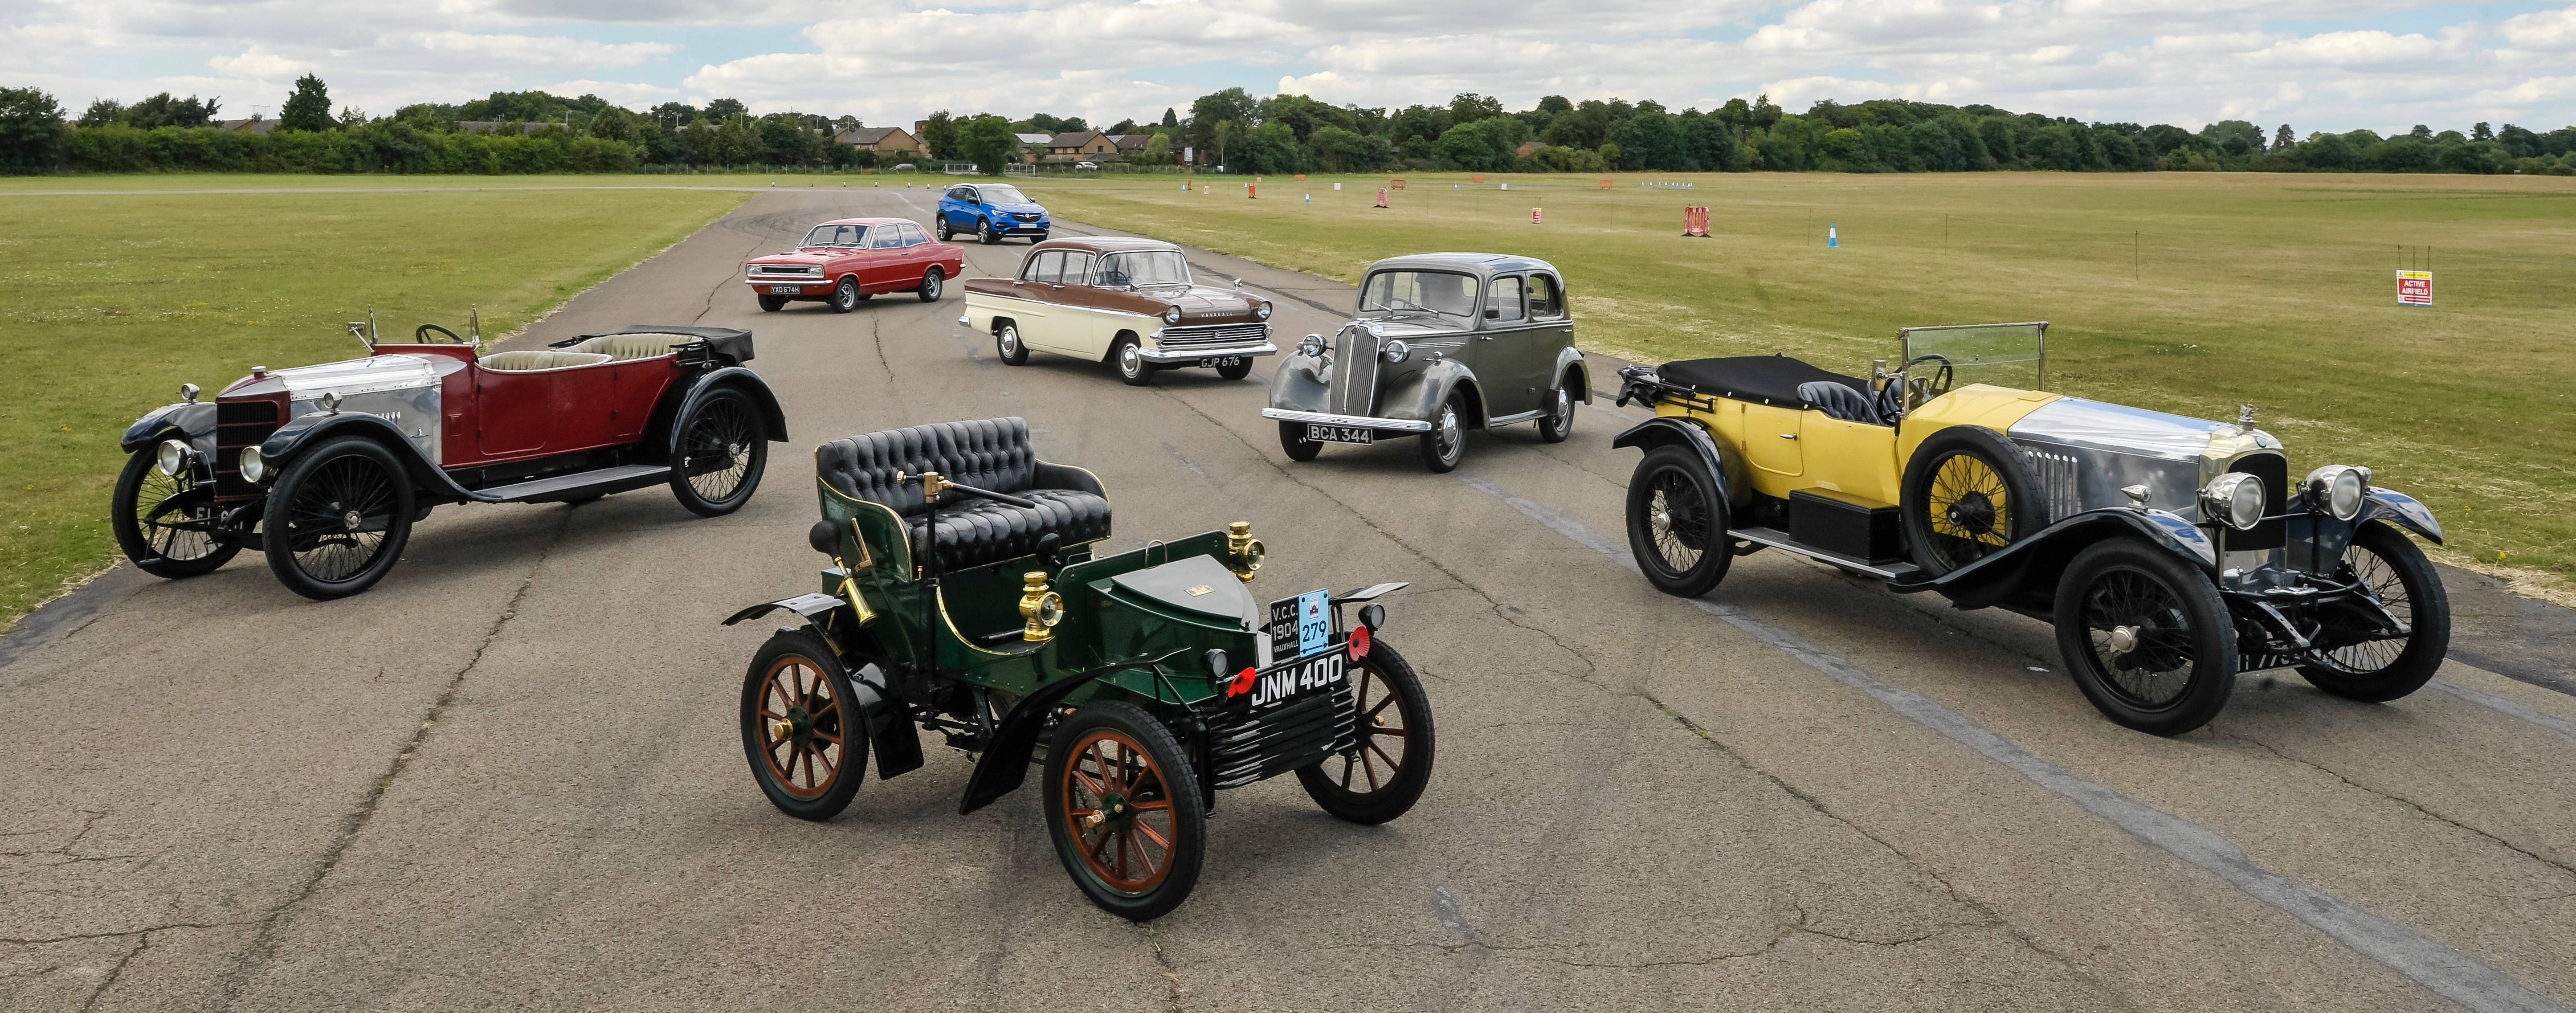 Vauxhall sets open house at Heritage Centre | ClassicCars.com Journal